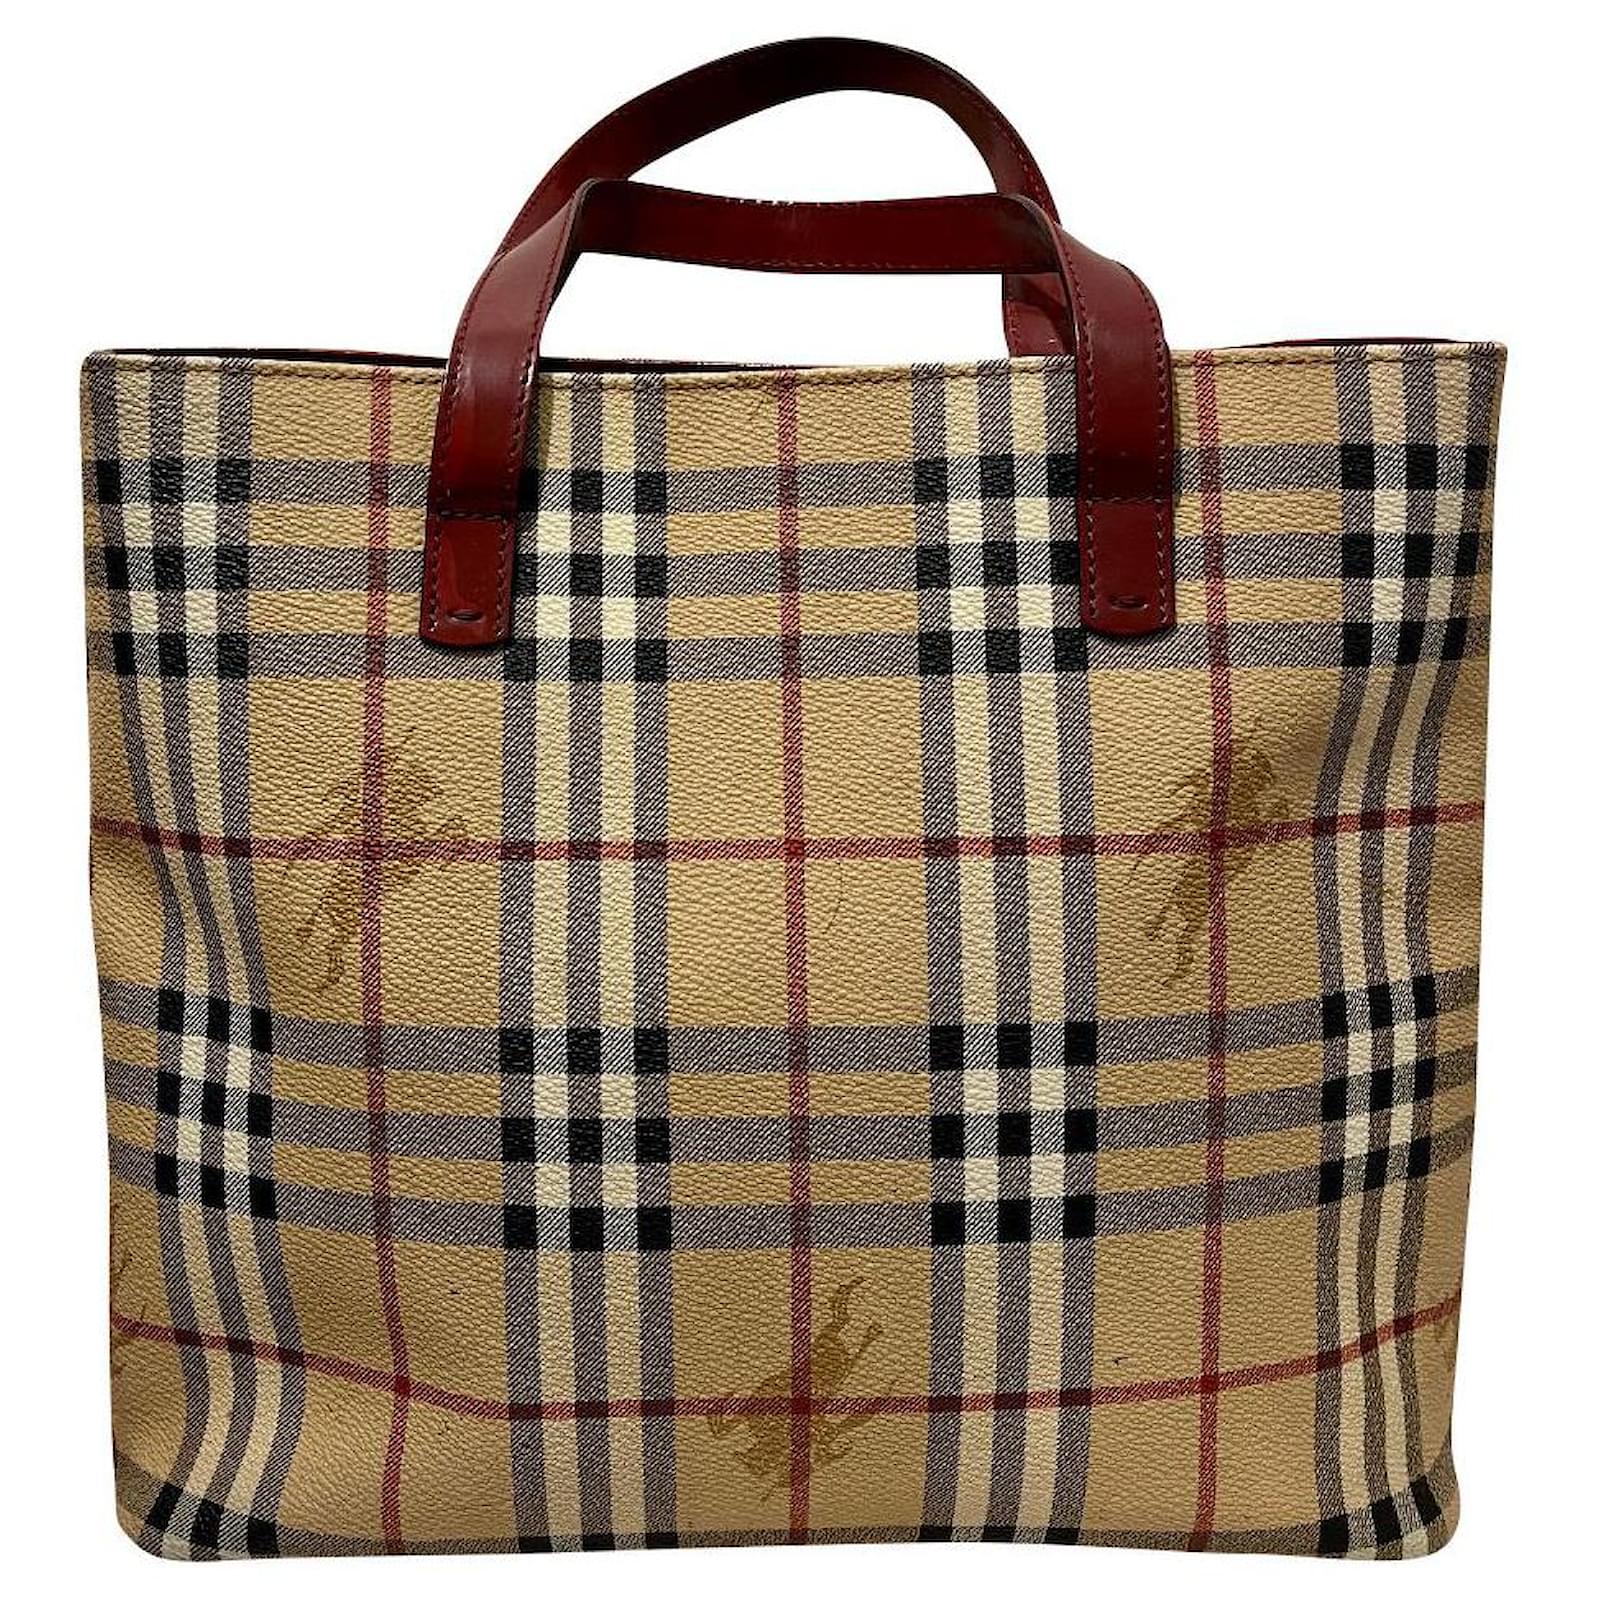 Vintage Burberry tote from coated canvas with leather trim and